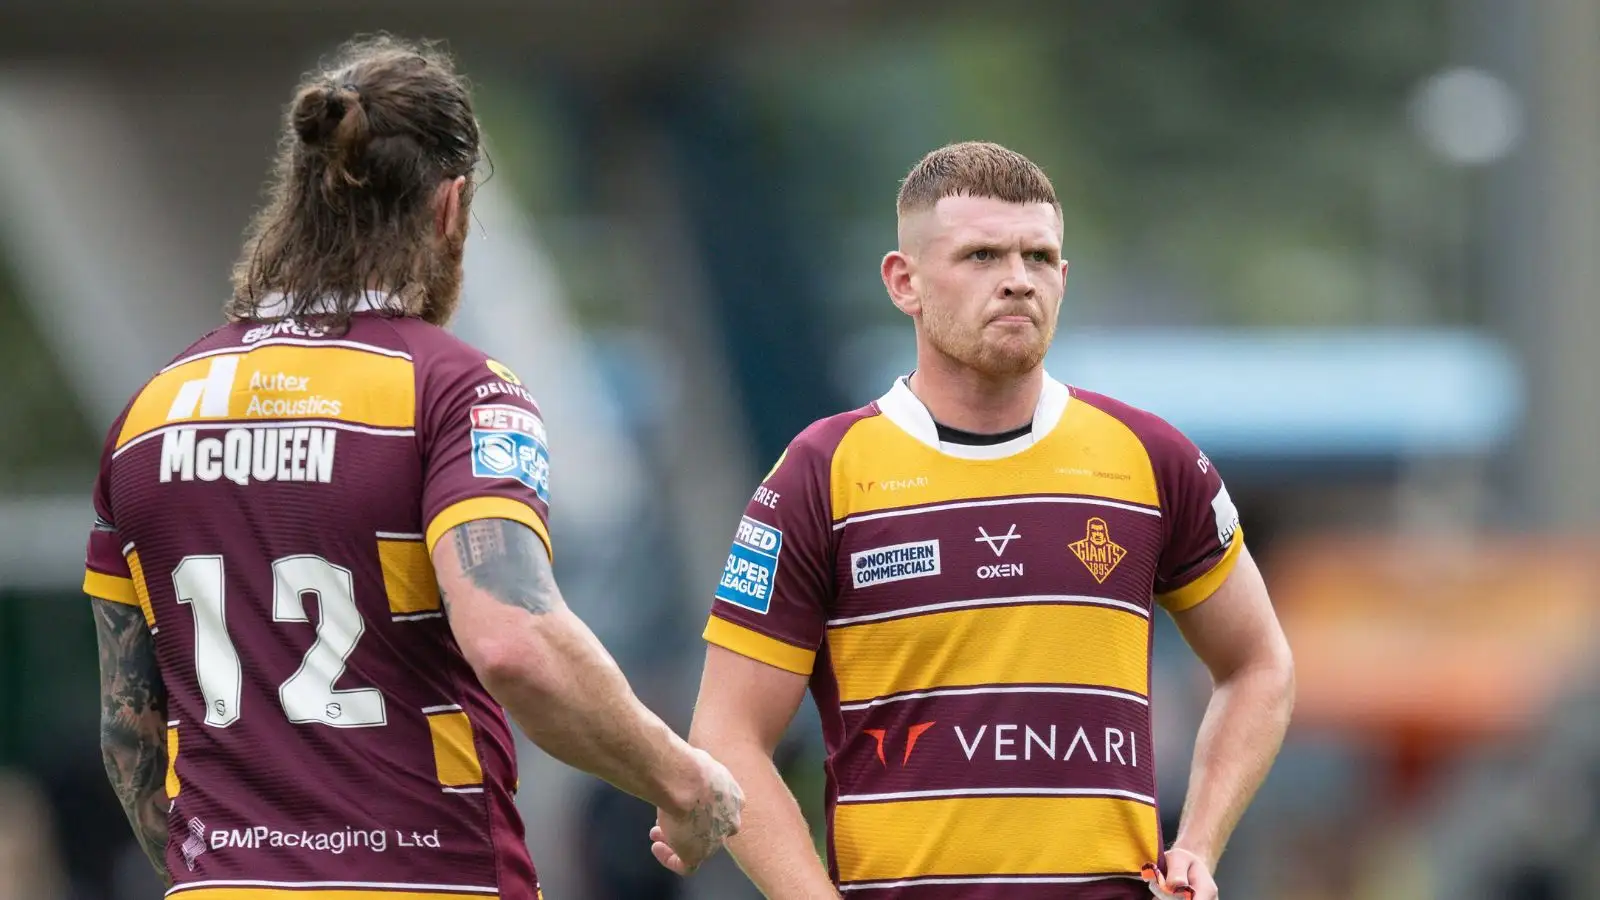 Huddersfield Giants suffer major blow amid play-off push with season-ending injury confirmed